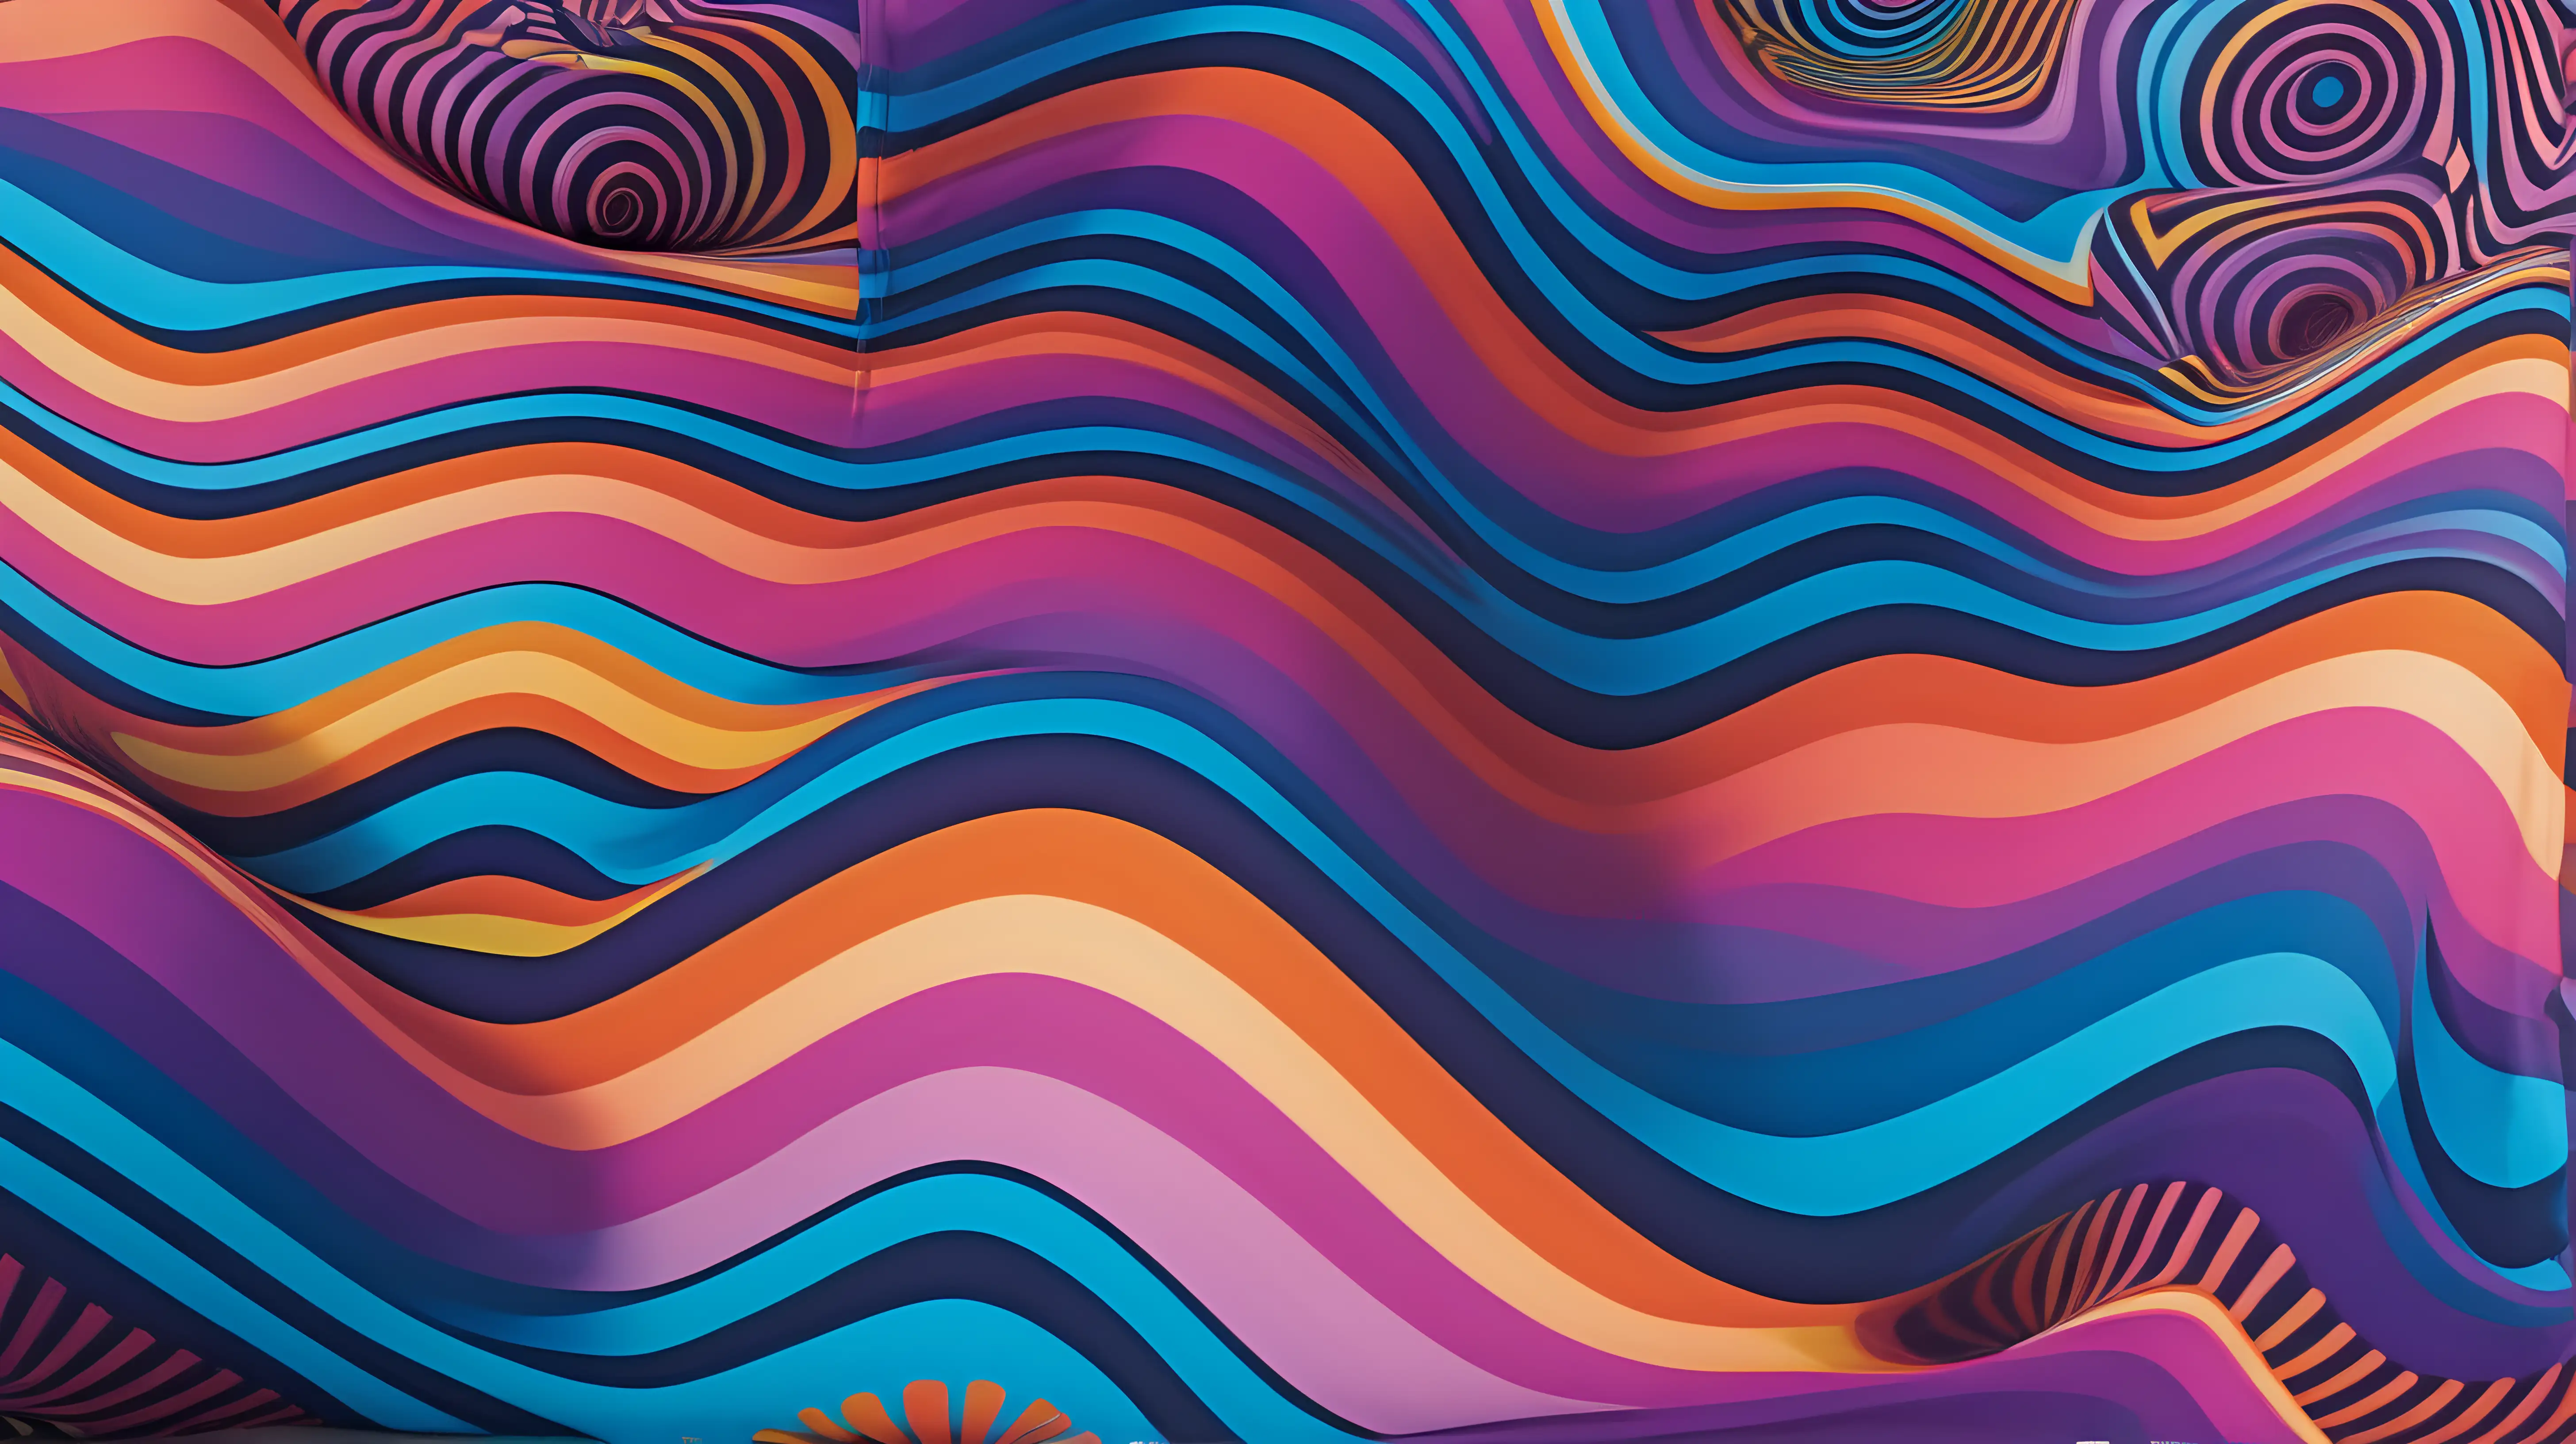 Mesmerizing Psychedelic Landscape with Vivid Contrasting Hues